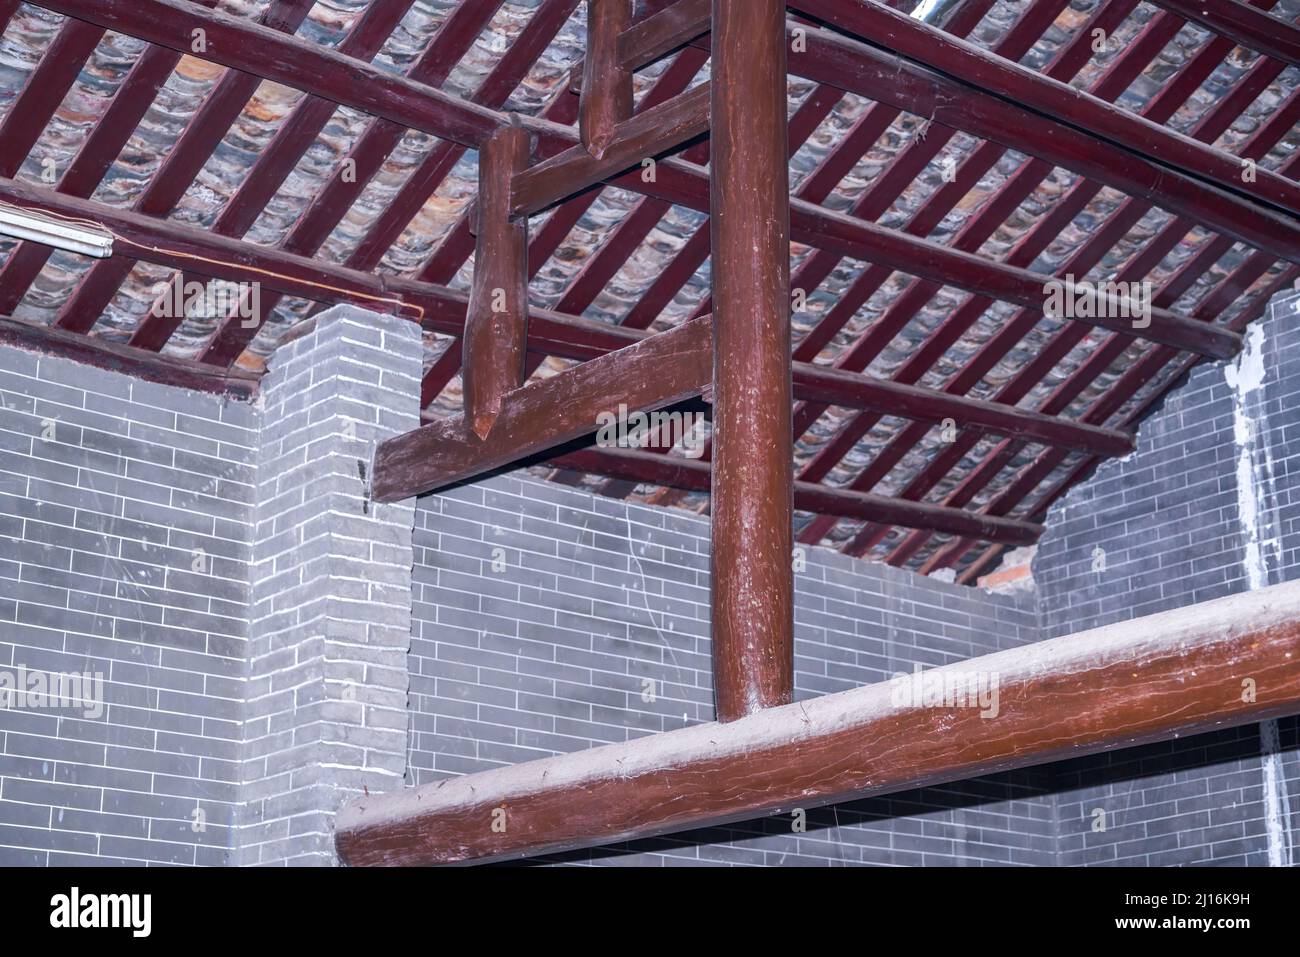 Wooden brick roof of traditional Chinese ancient building Stock Photo